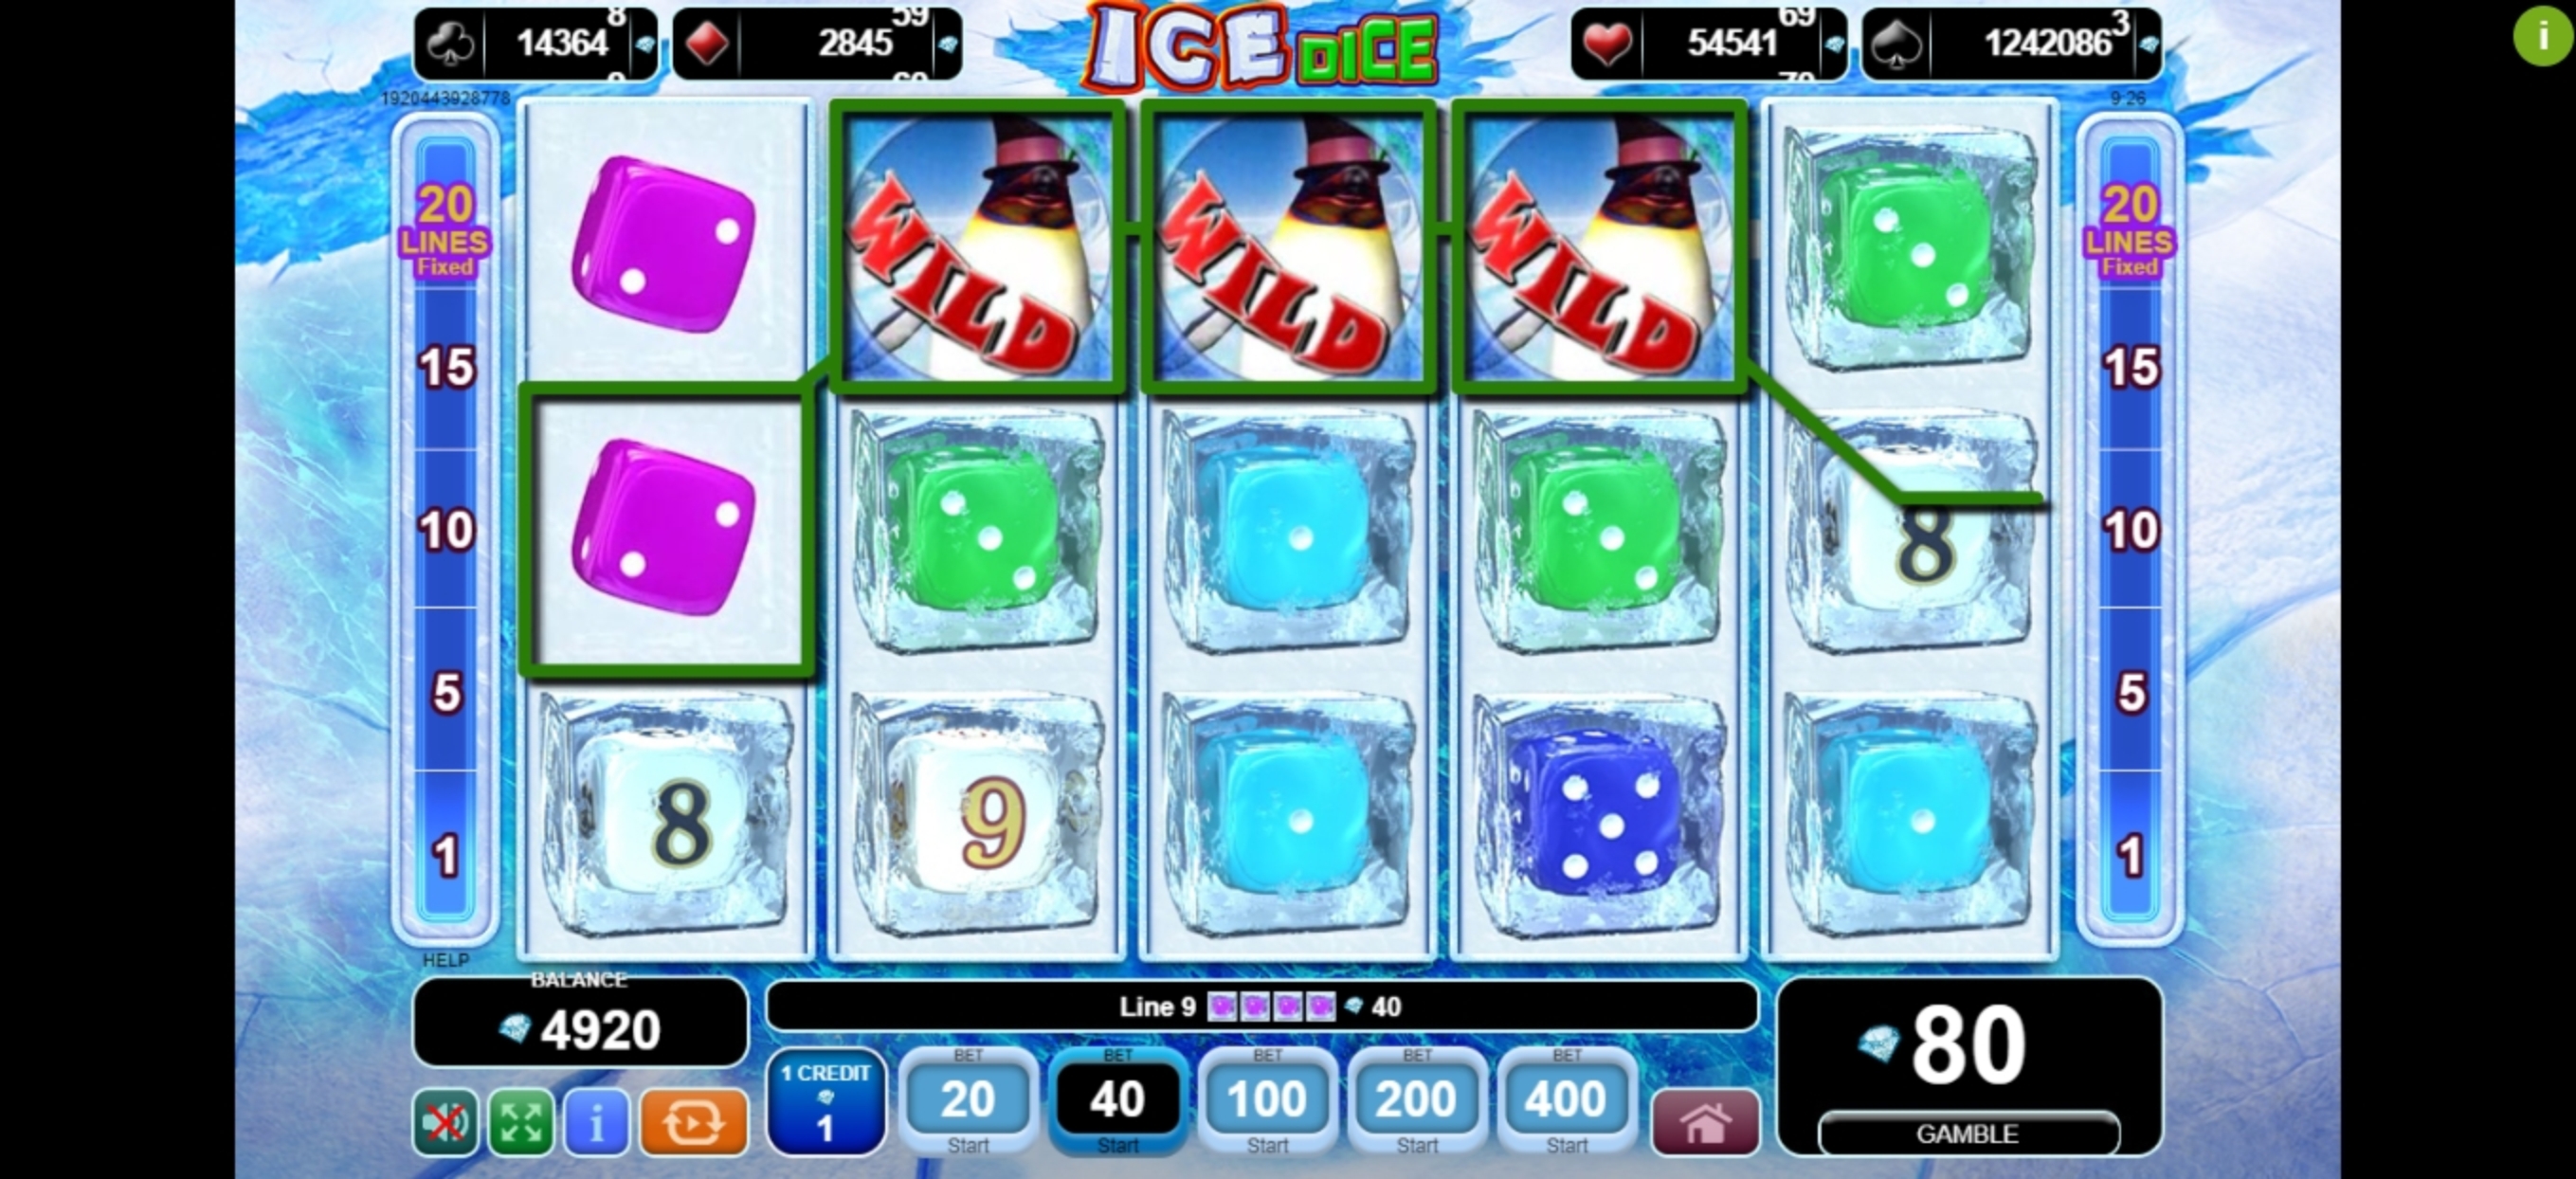 Win Money in Ice Dice Free Slot Game by EGT